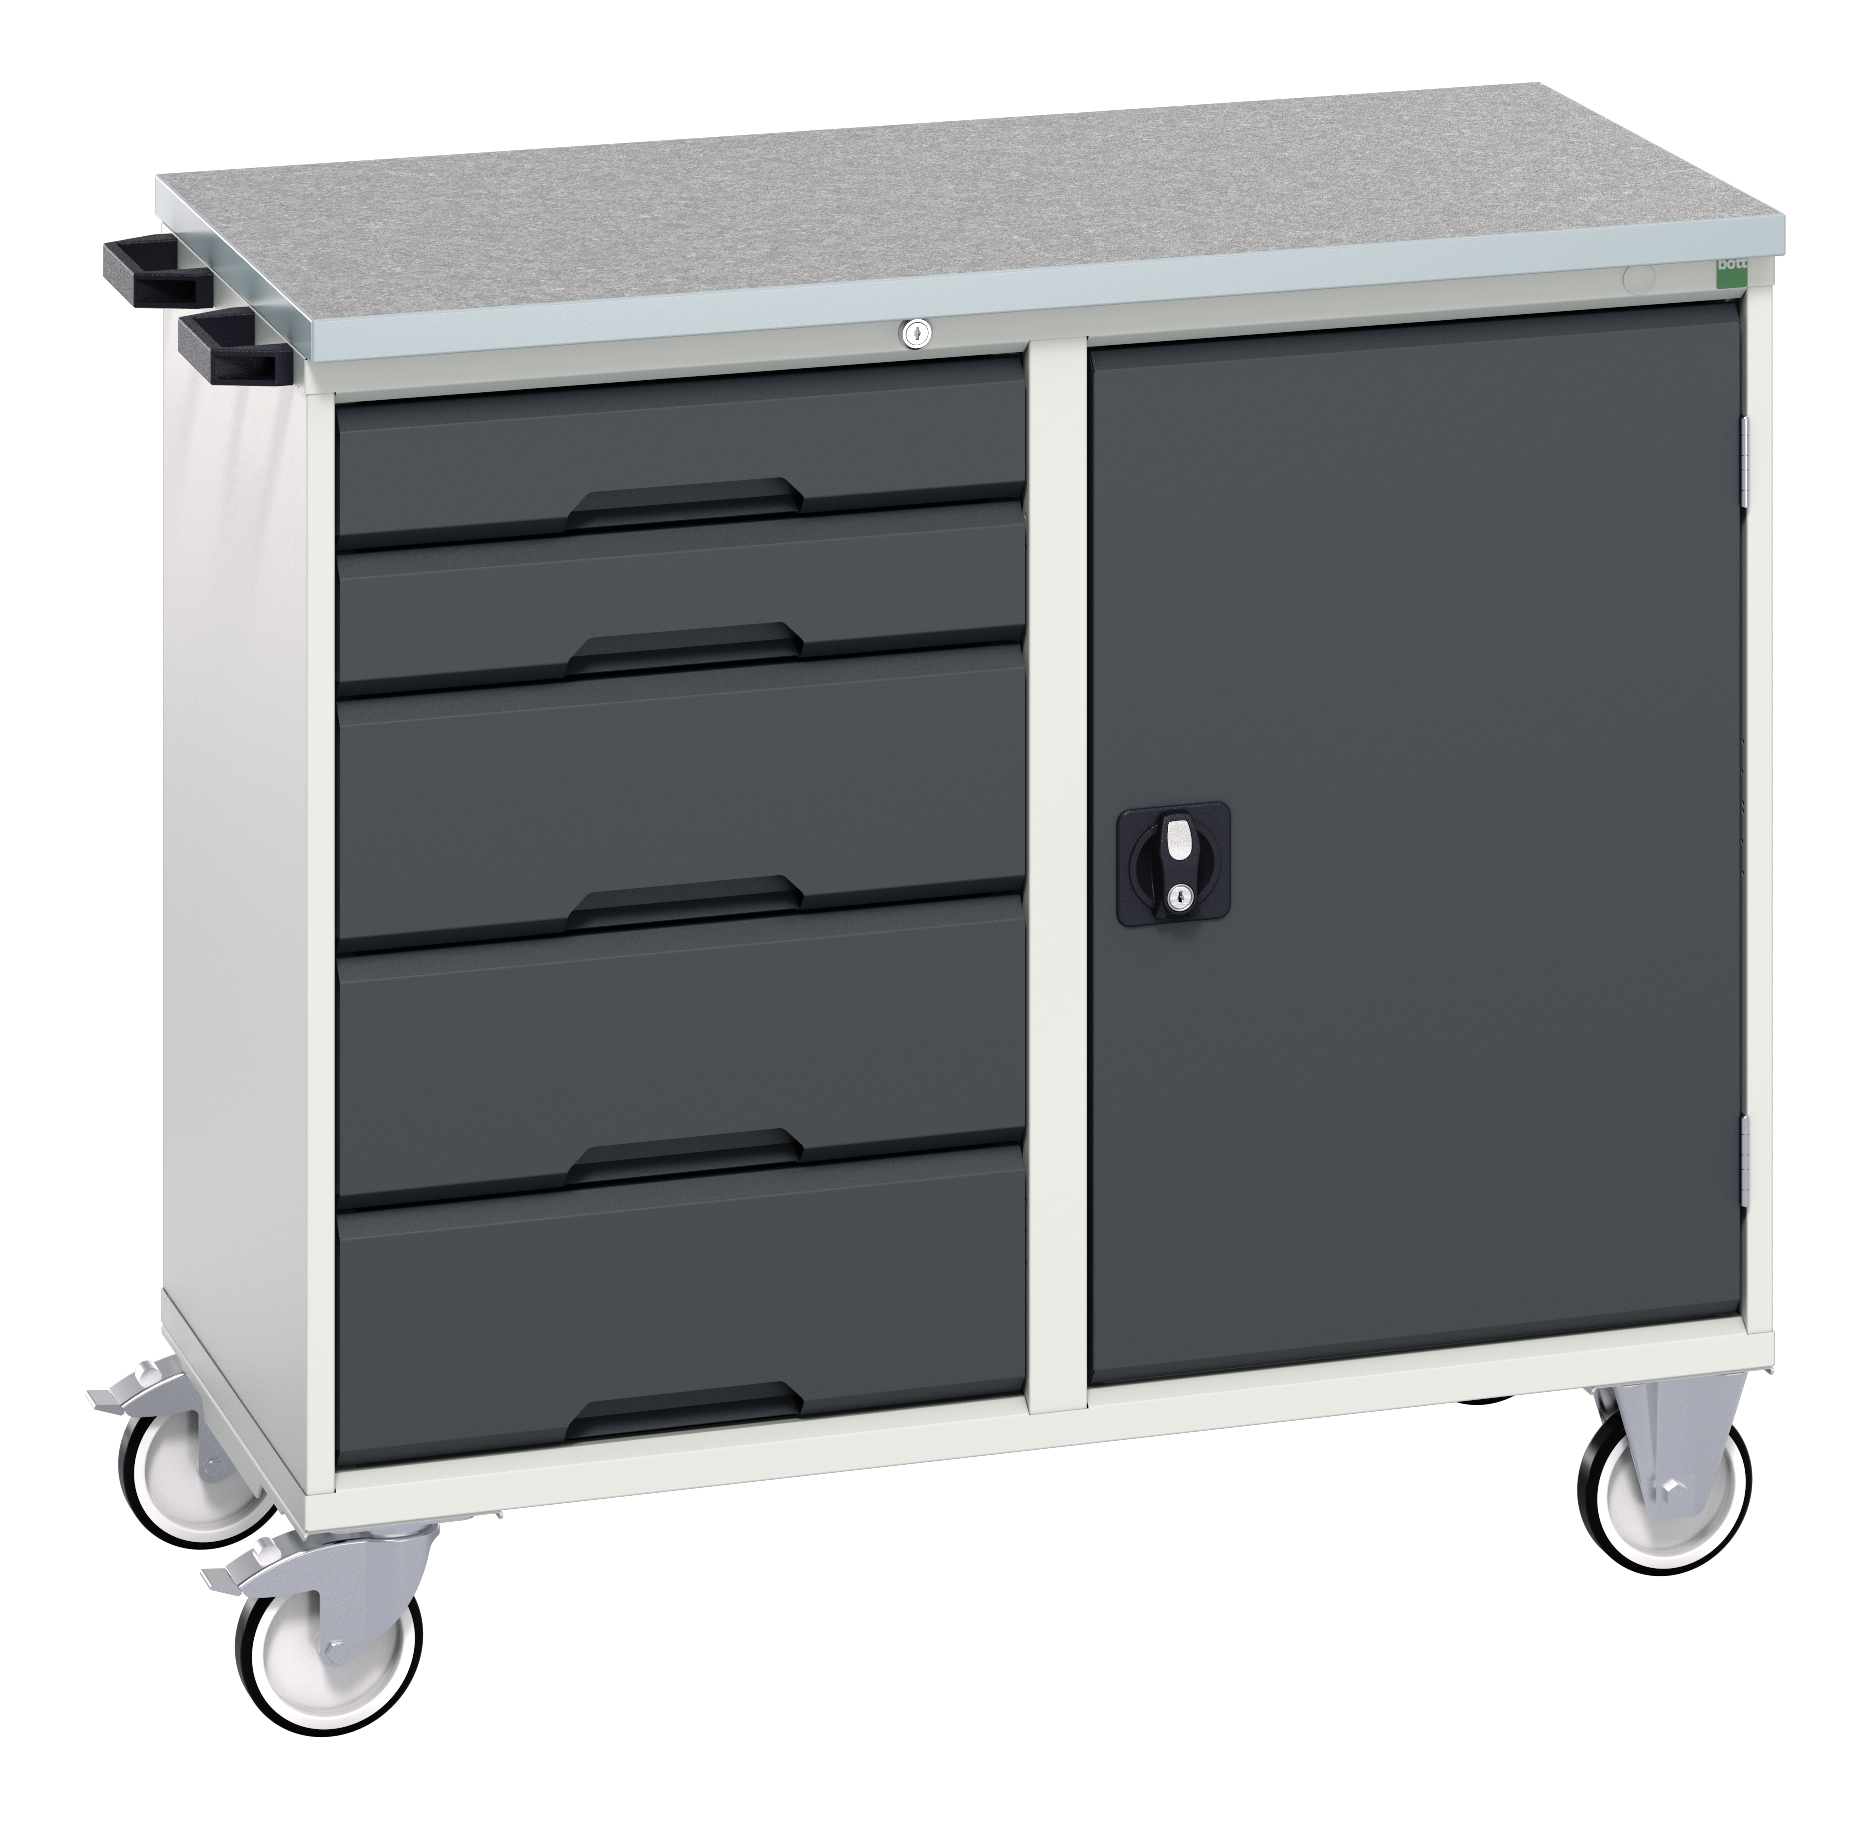 Bott Verso Maintenance Trolley With 5 Drawers / Cupboard & Lino Top - 16927120.19